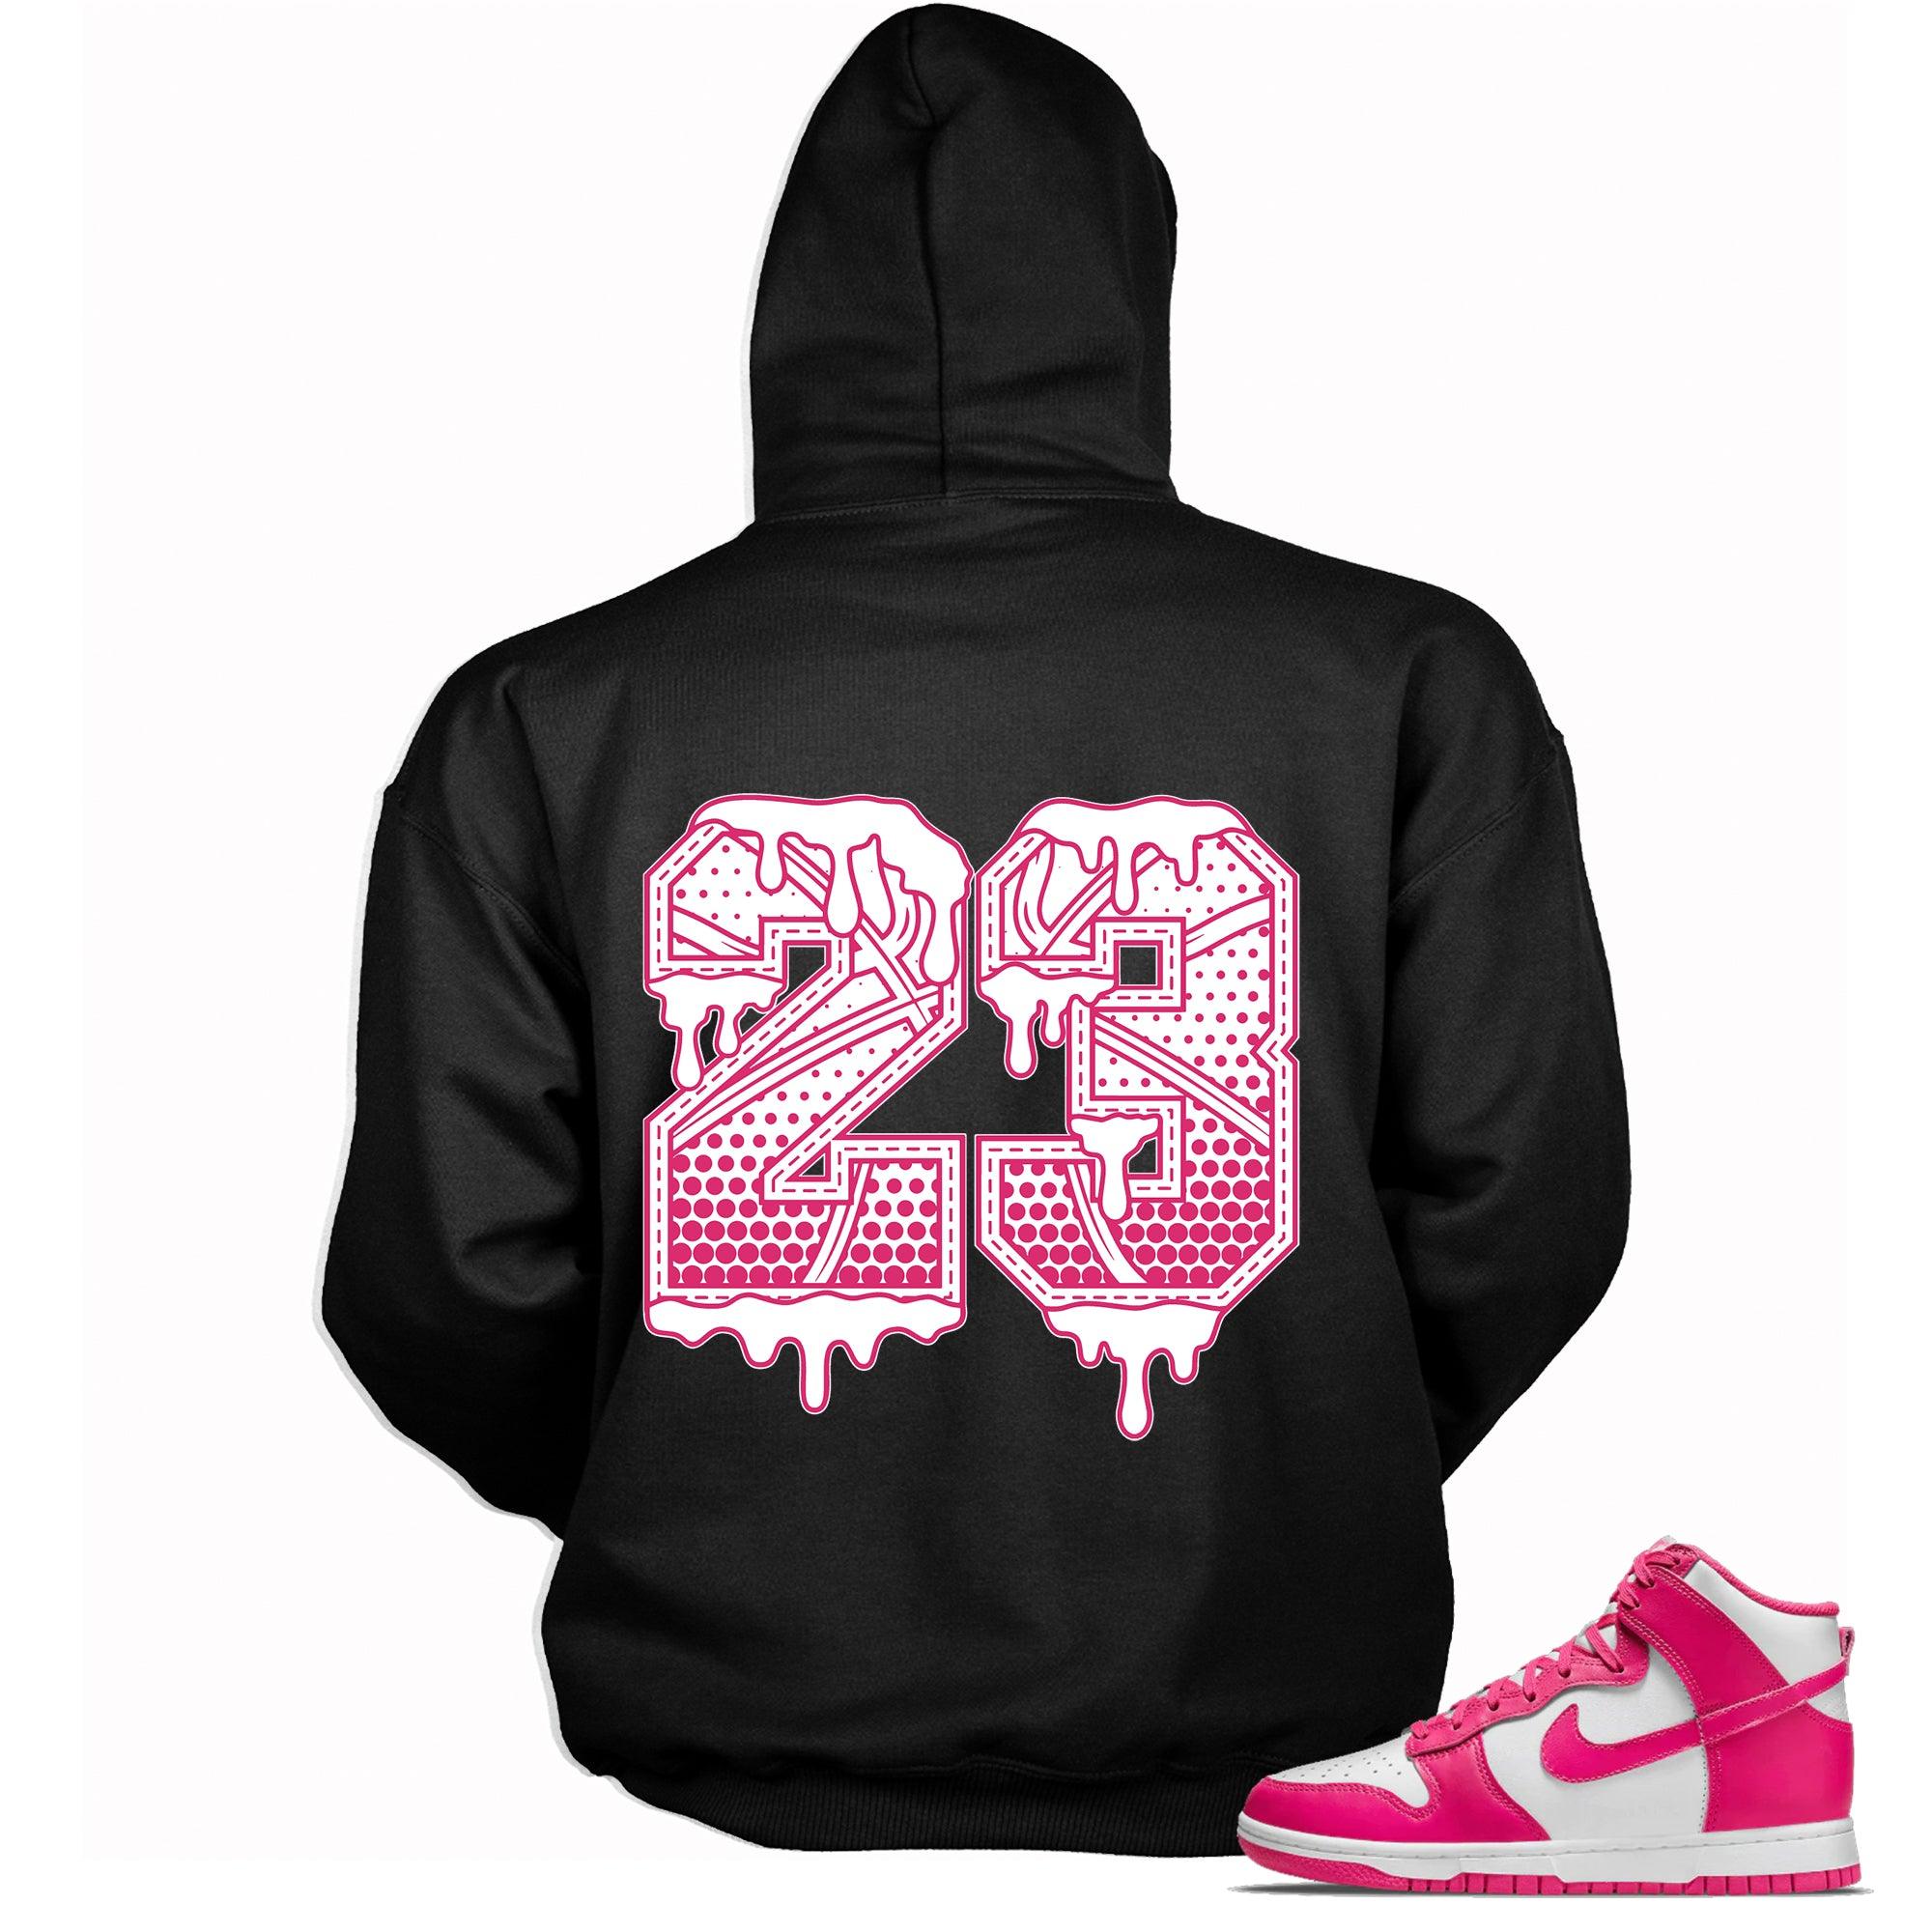 Nike Dunk High Pink Prime Release